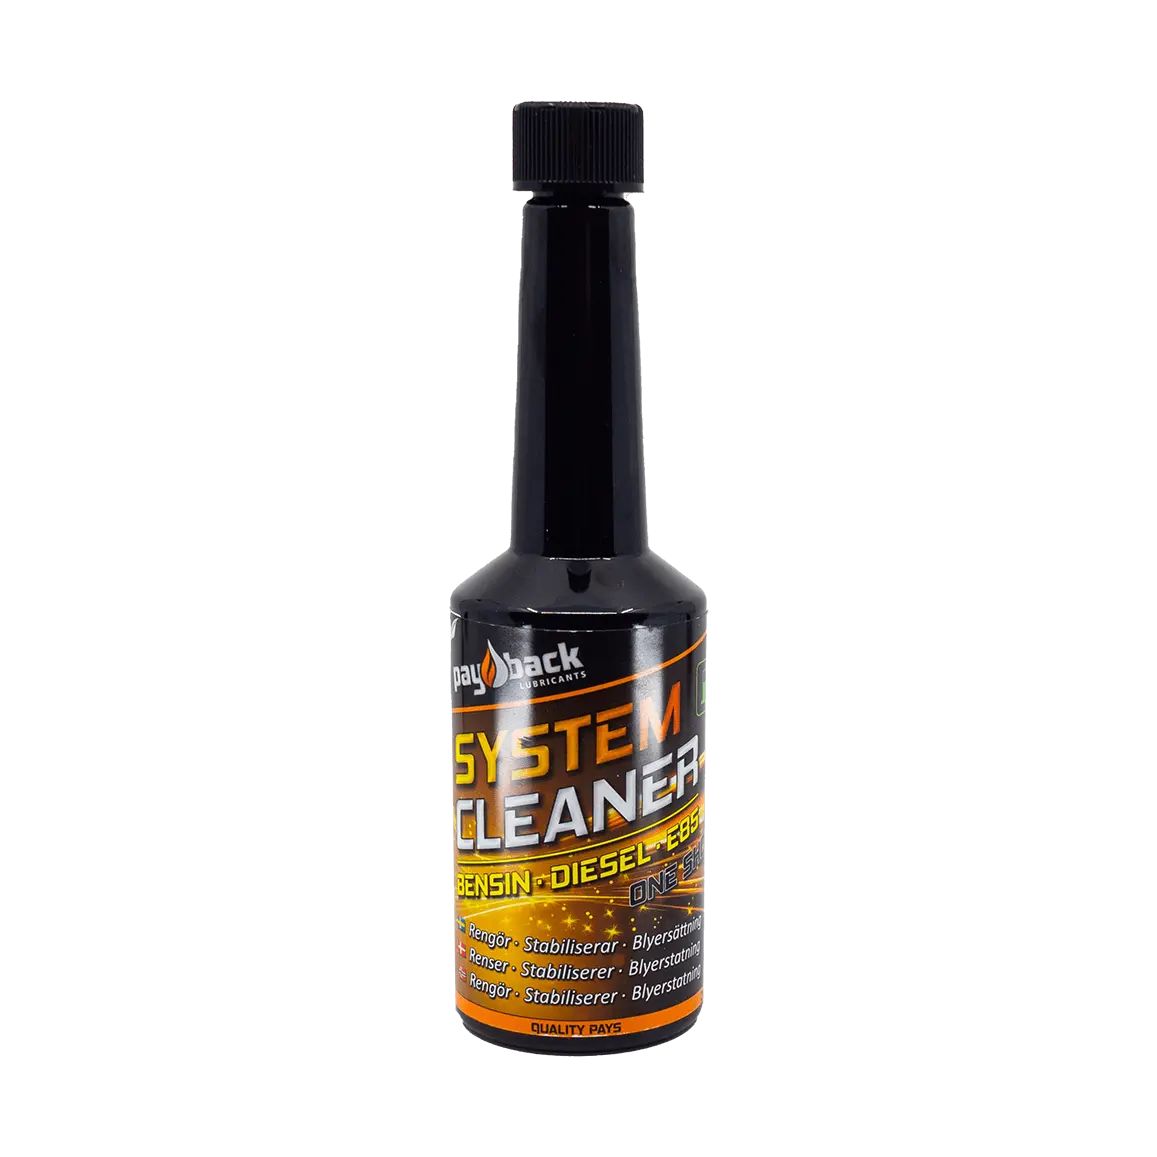 PayBack All Fuel System Cleaner